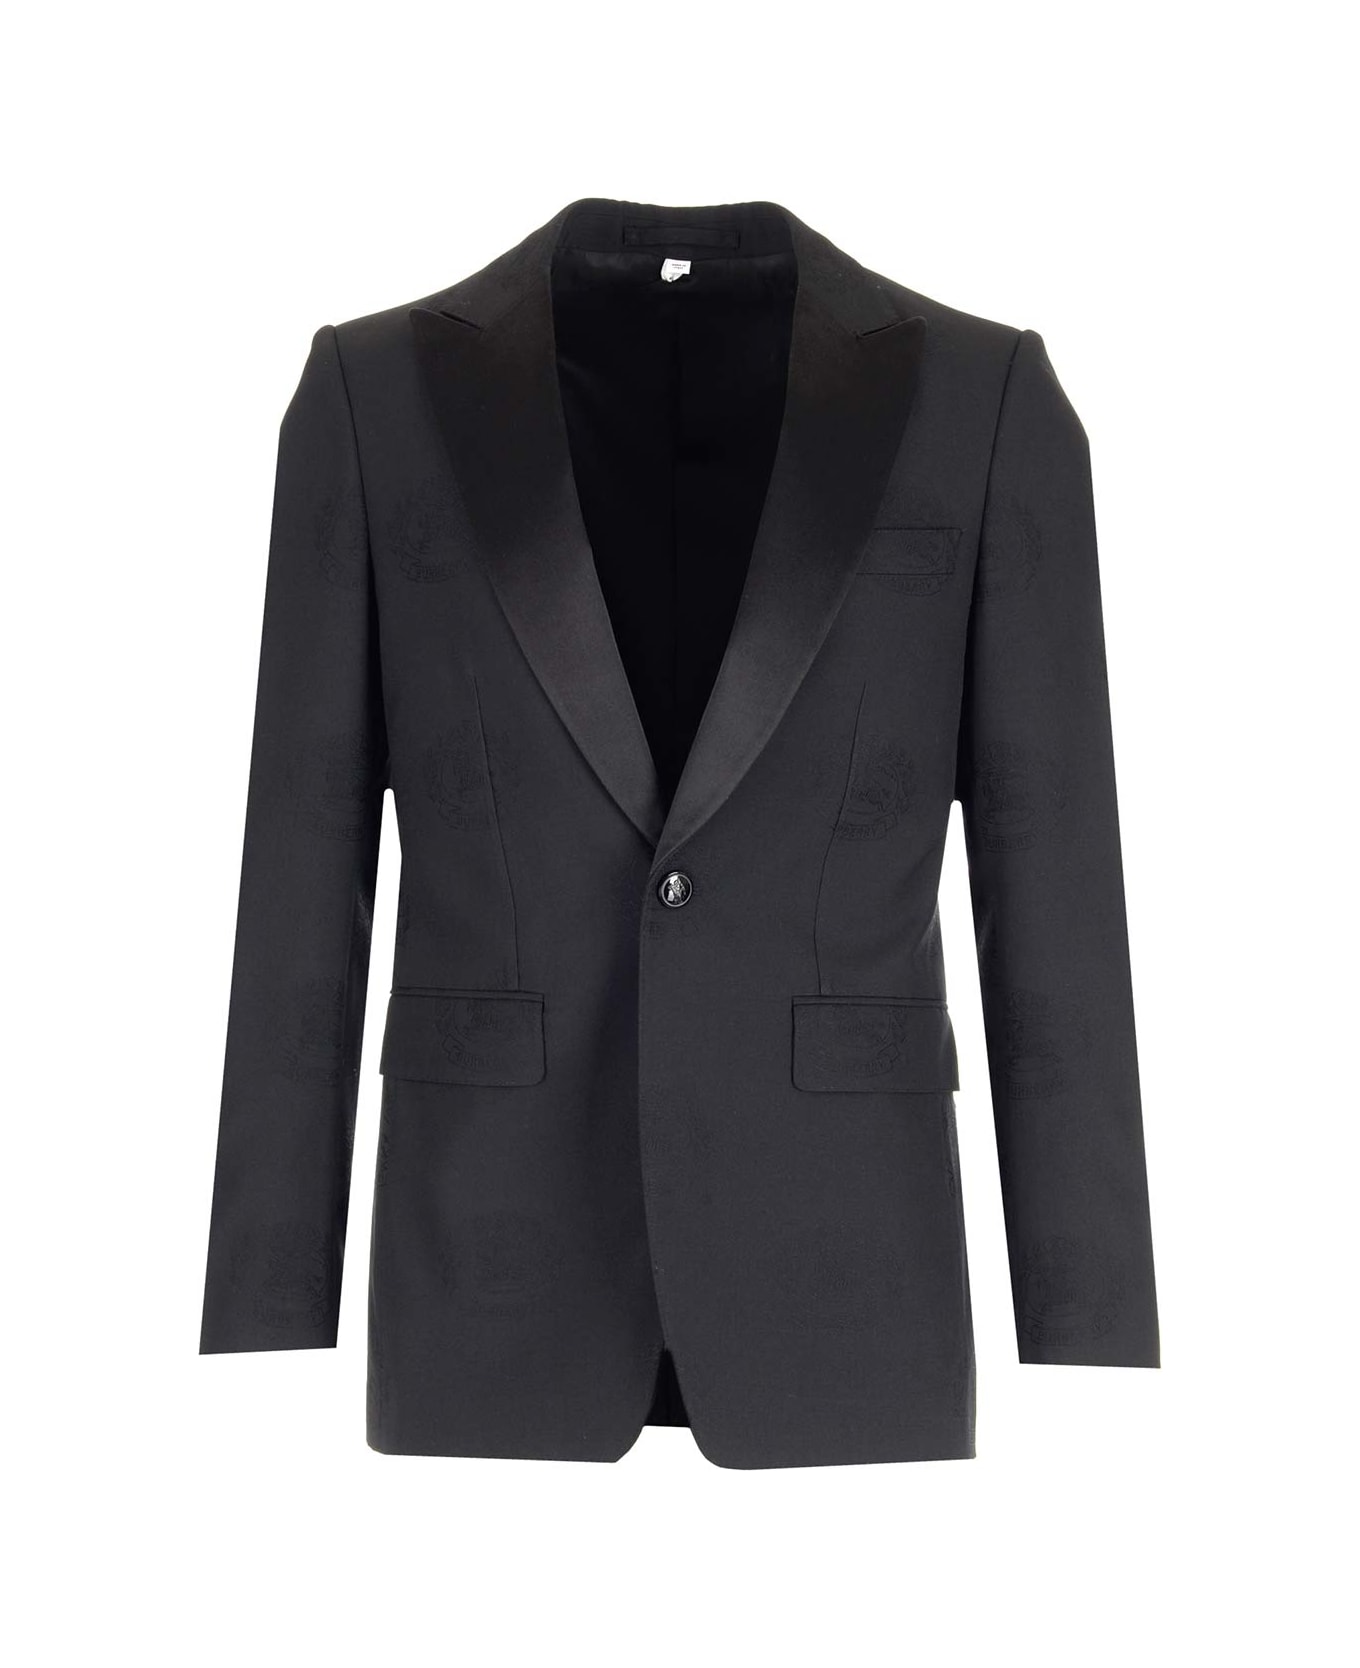 Burberry Black Single-breasted Tailored Jacket - Black ブレザー